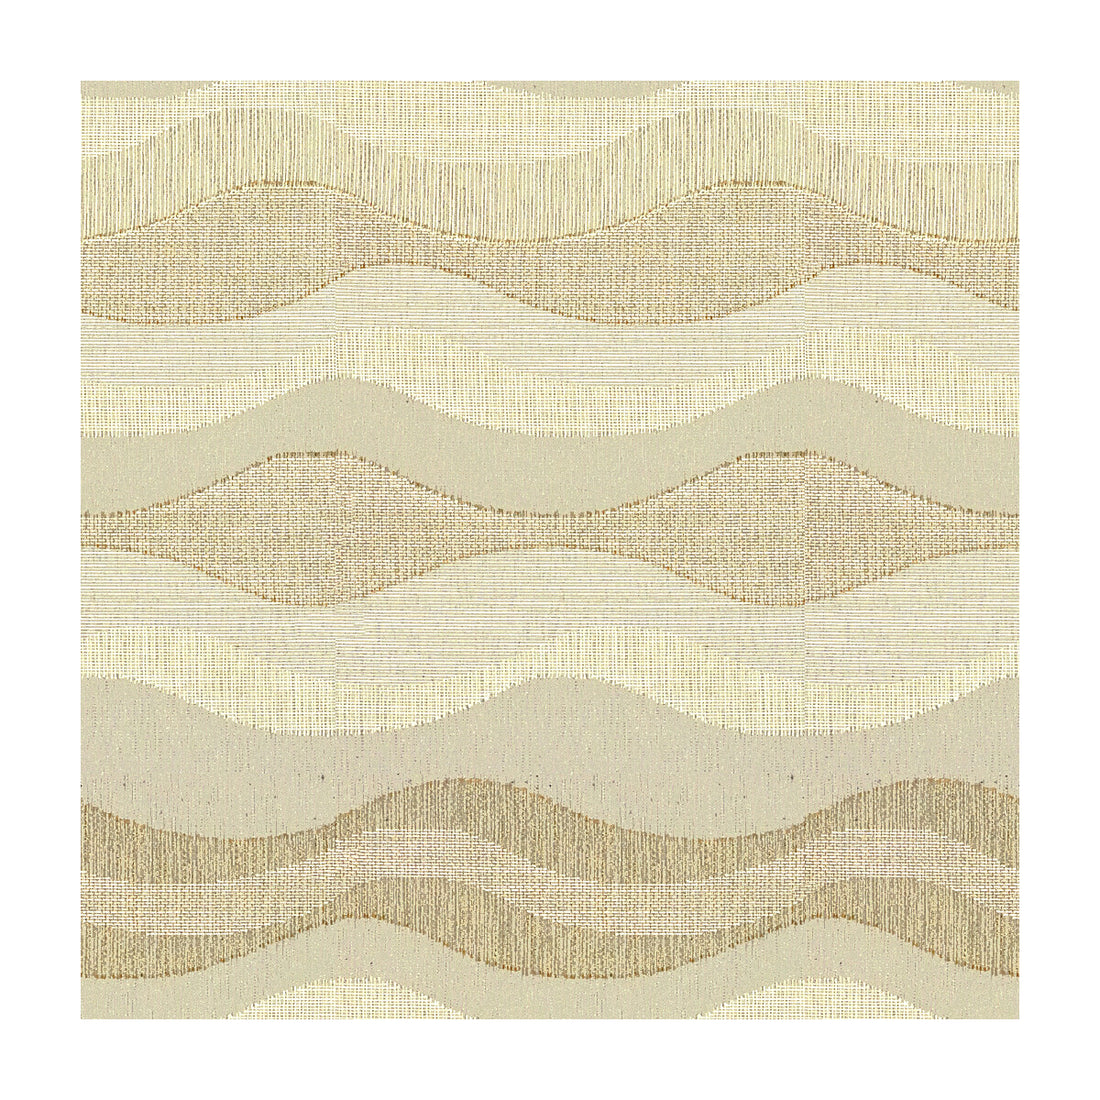 Kravet Contract fabric in 4151-1616 color - pattern 4151.1616.0 - by Kravet Contract